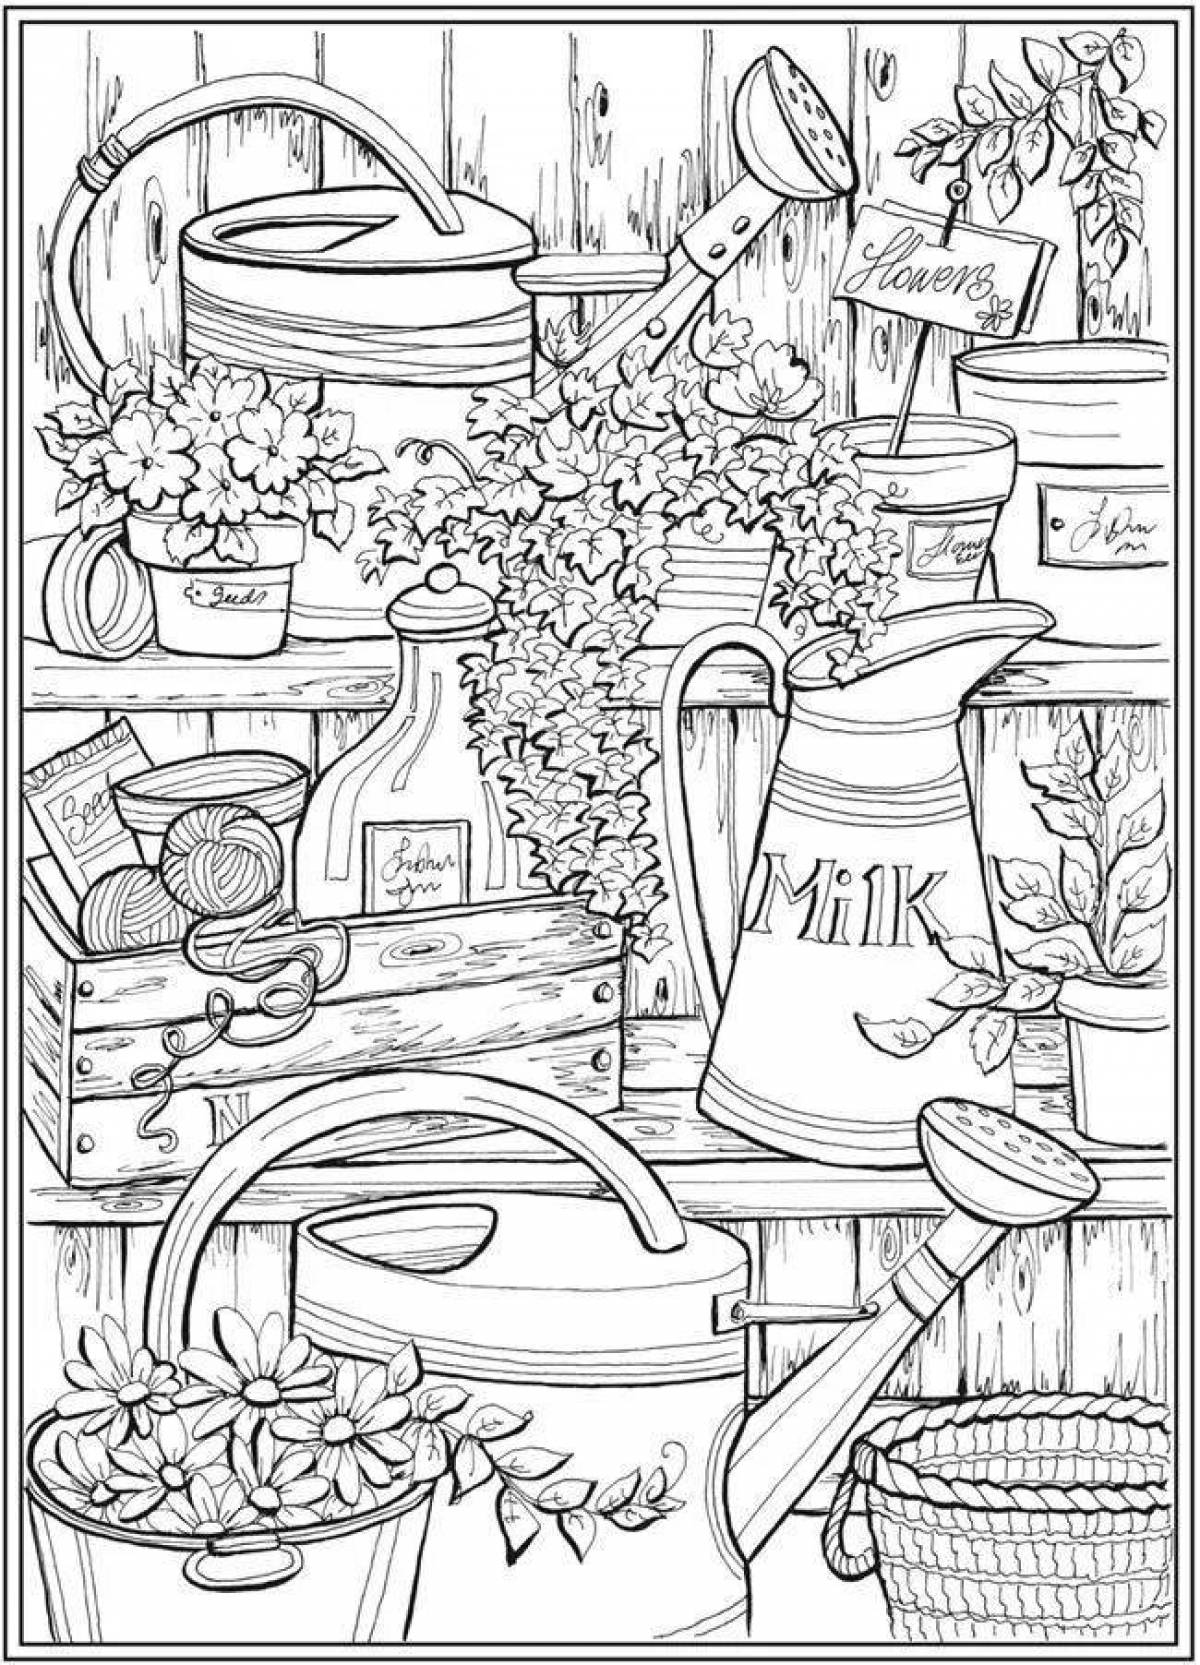 Creative haven coloring page - amazing